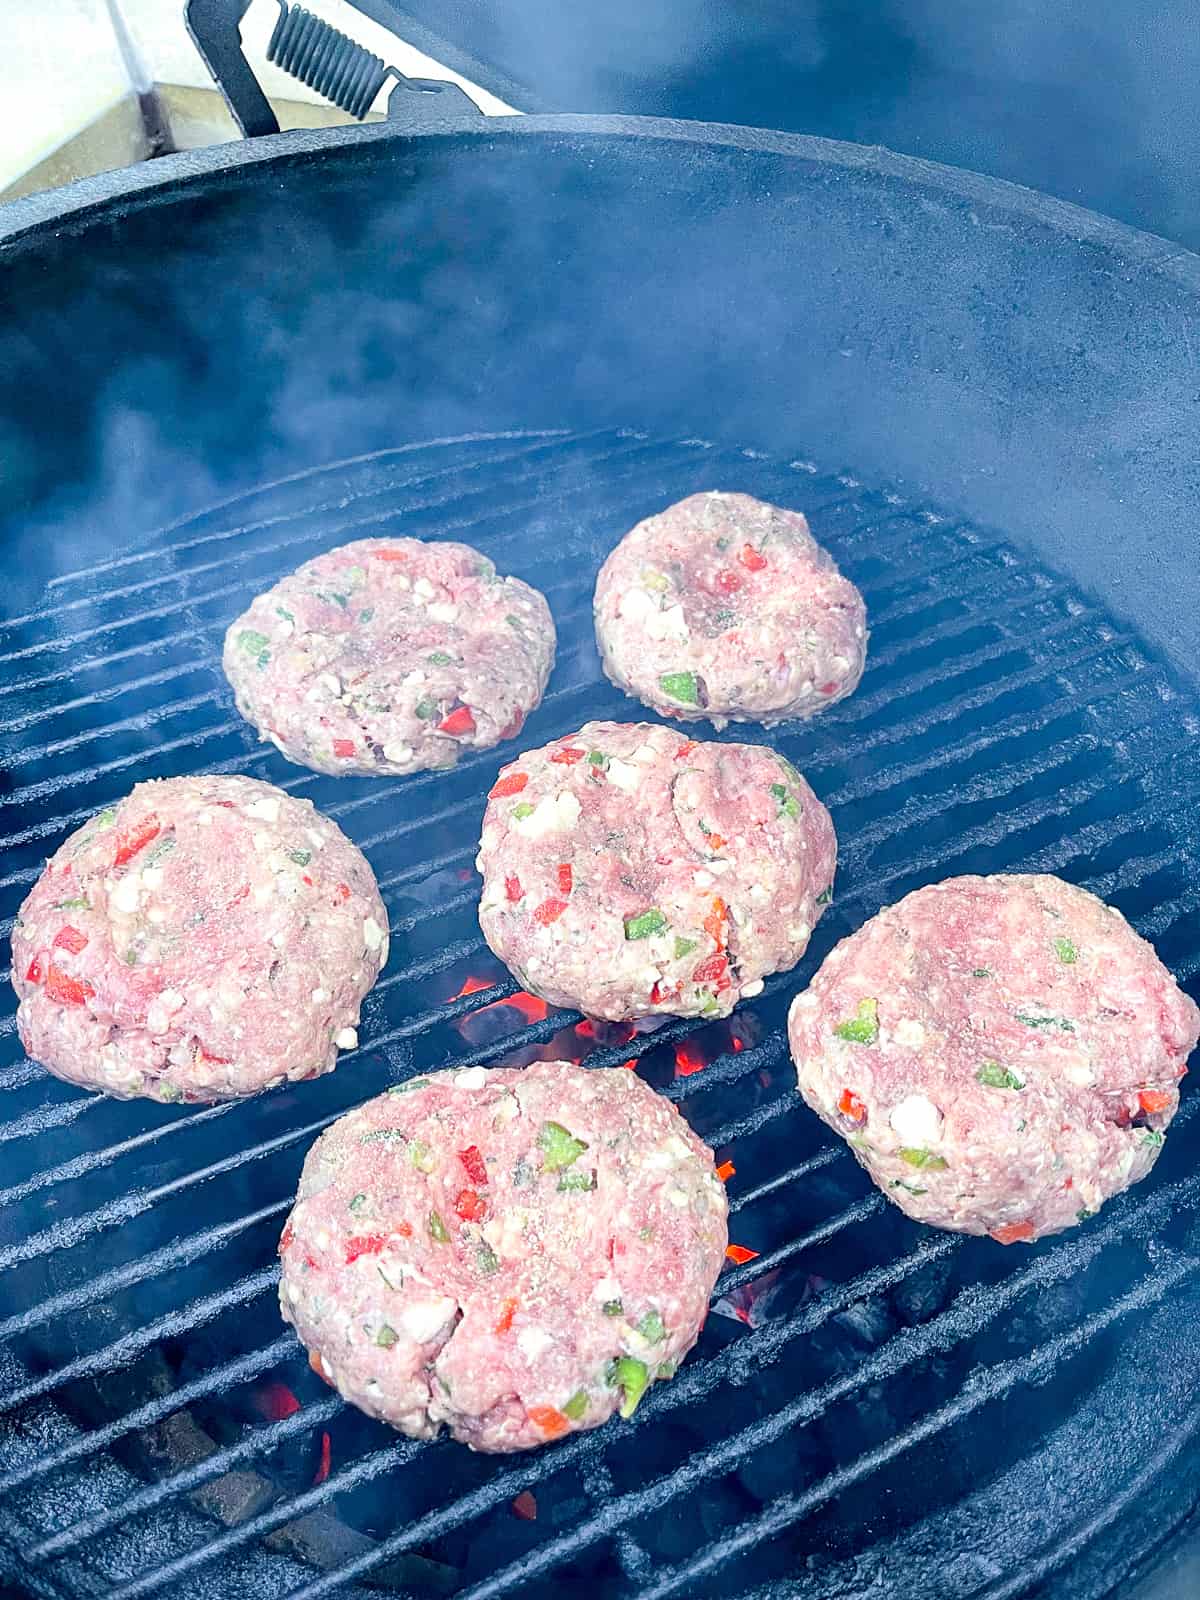 A grill with some feta burgers.